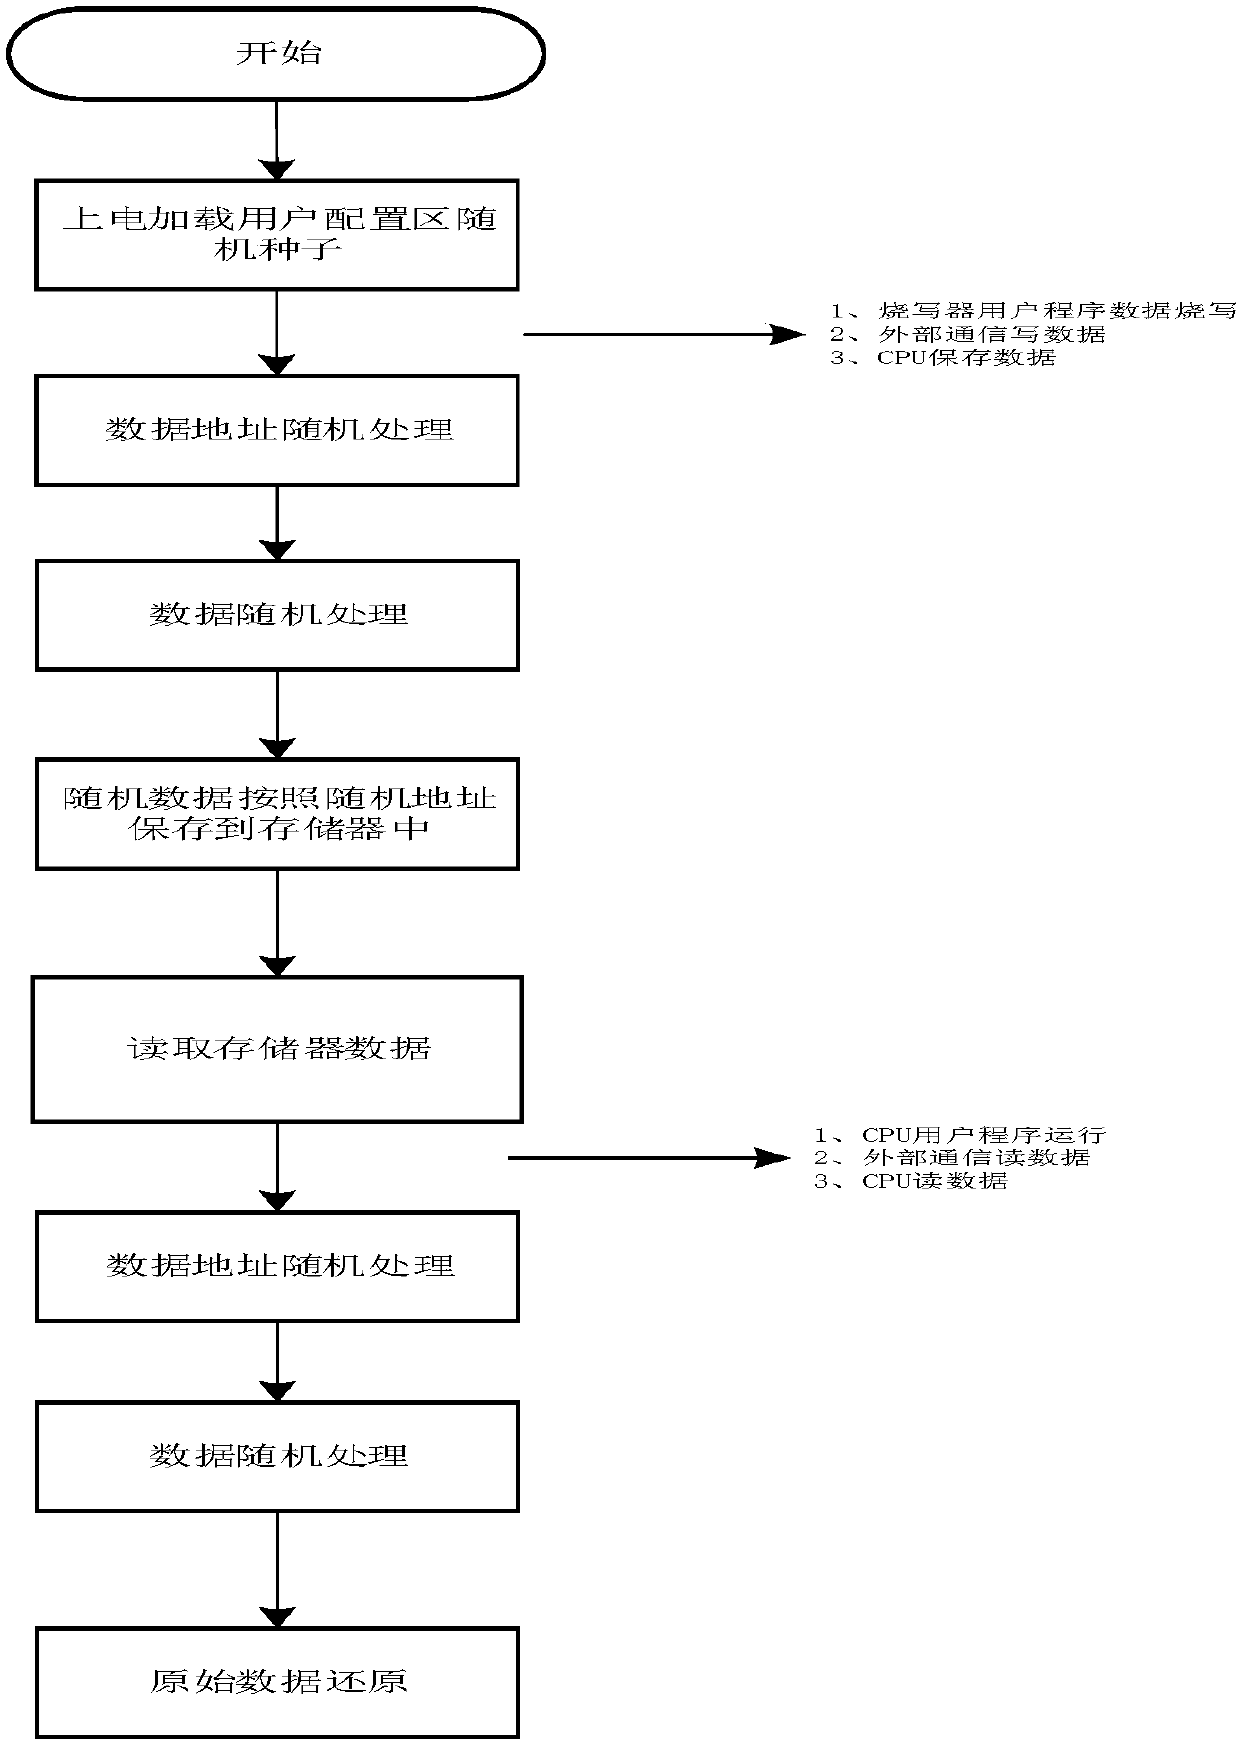 Implementation method for memory data encryption protection